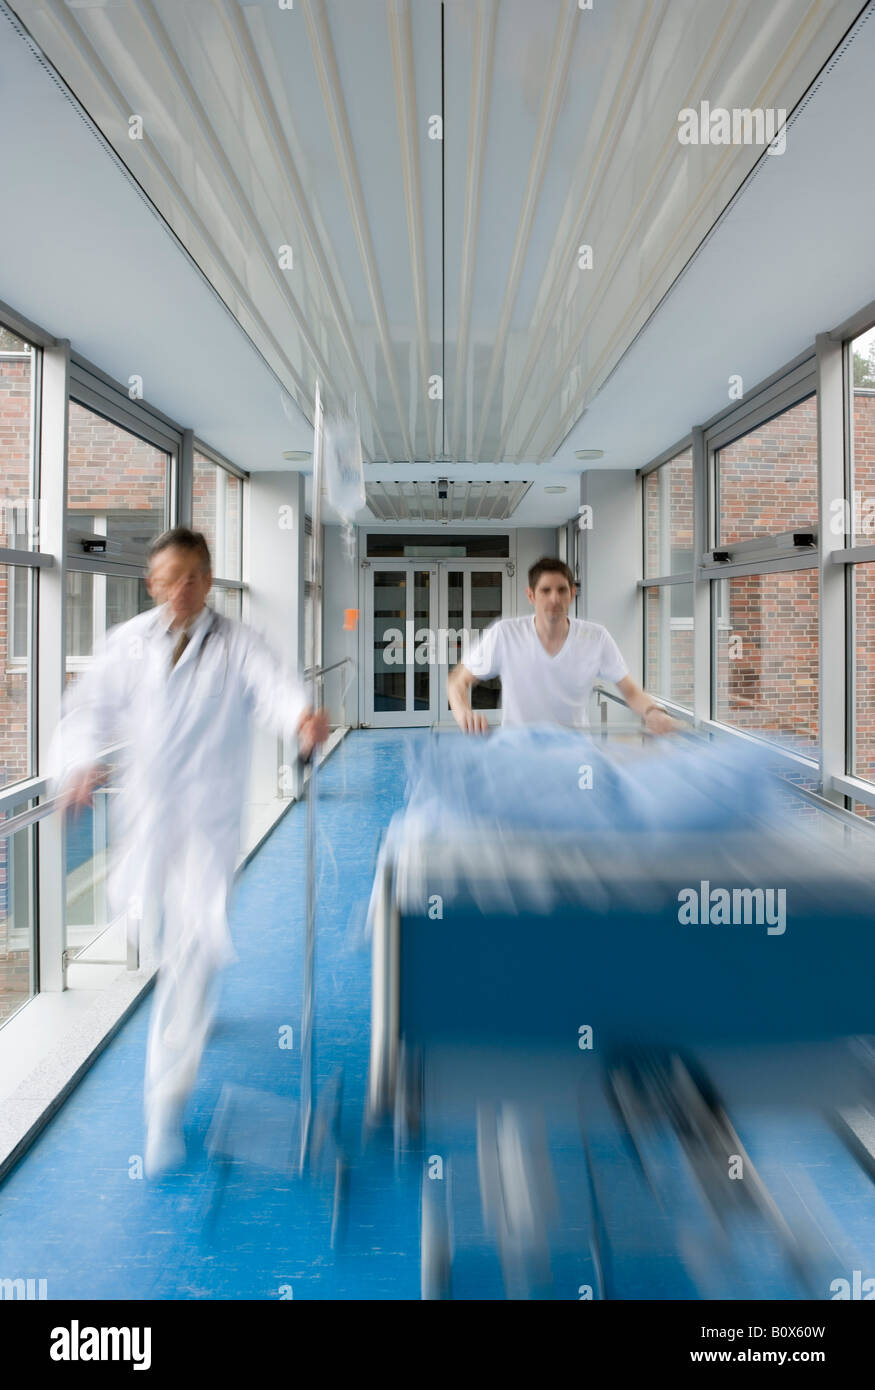 Two healthcare workers pushing a hospital bed along a corridor Stock Photo